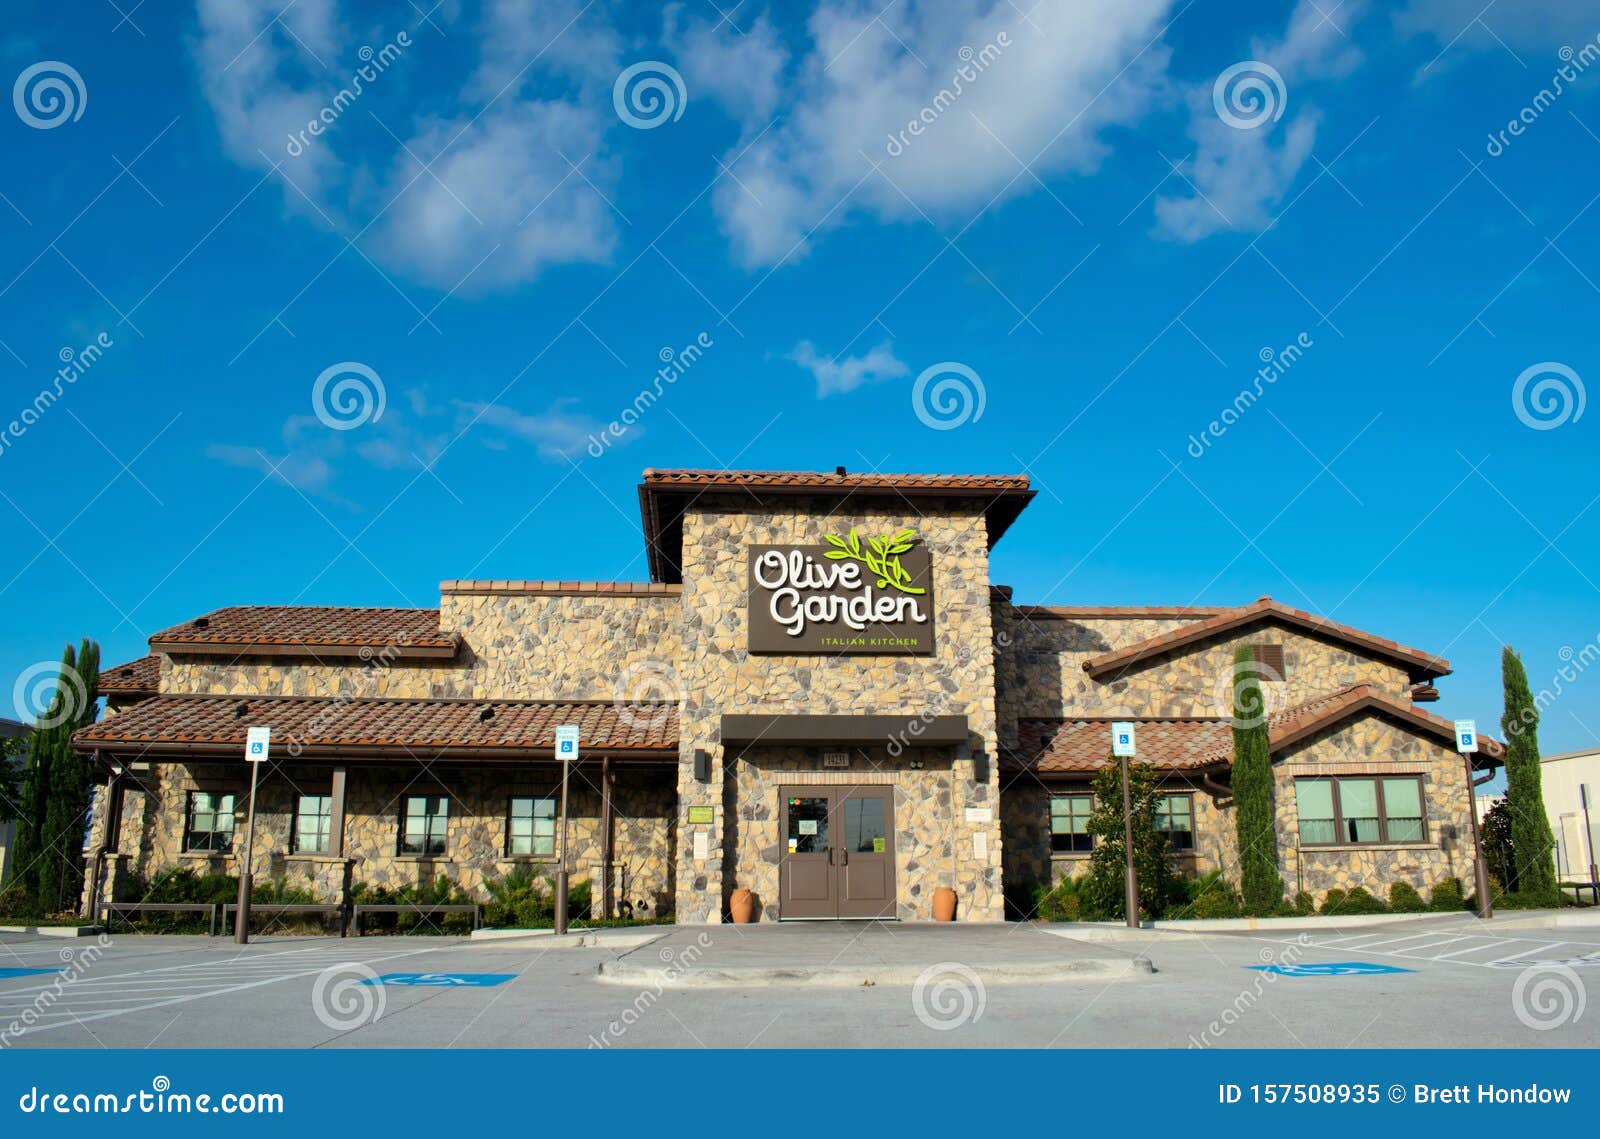 Olive Garden Restaurant In Humble Texas Editorial Image Image Of Design Architecture 157508935